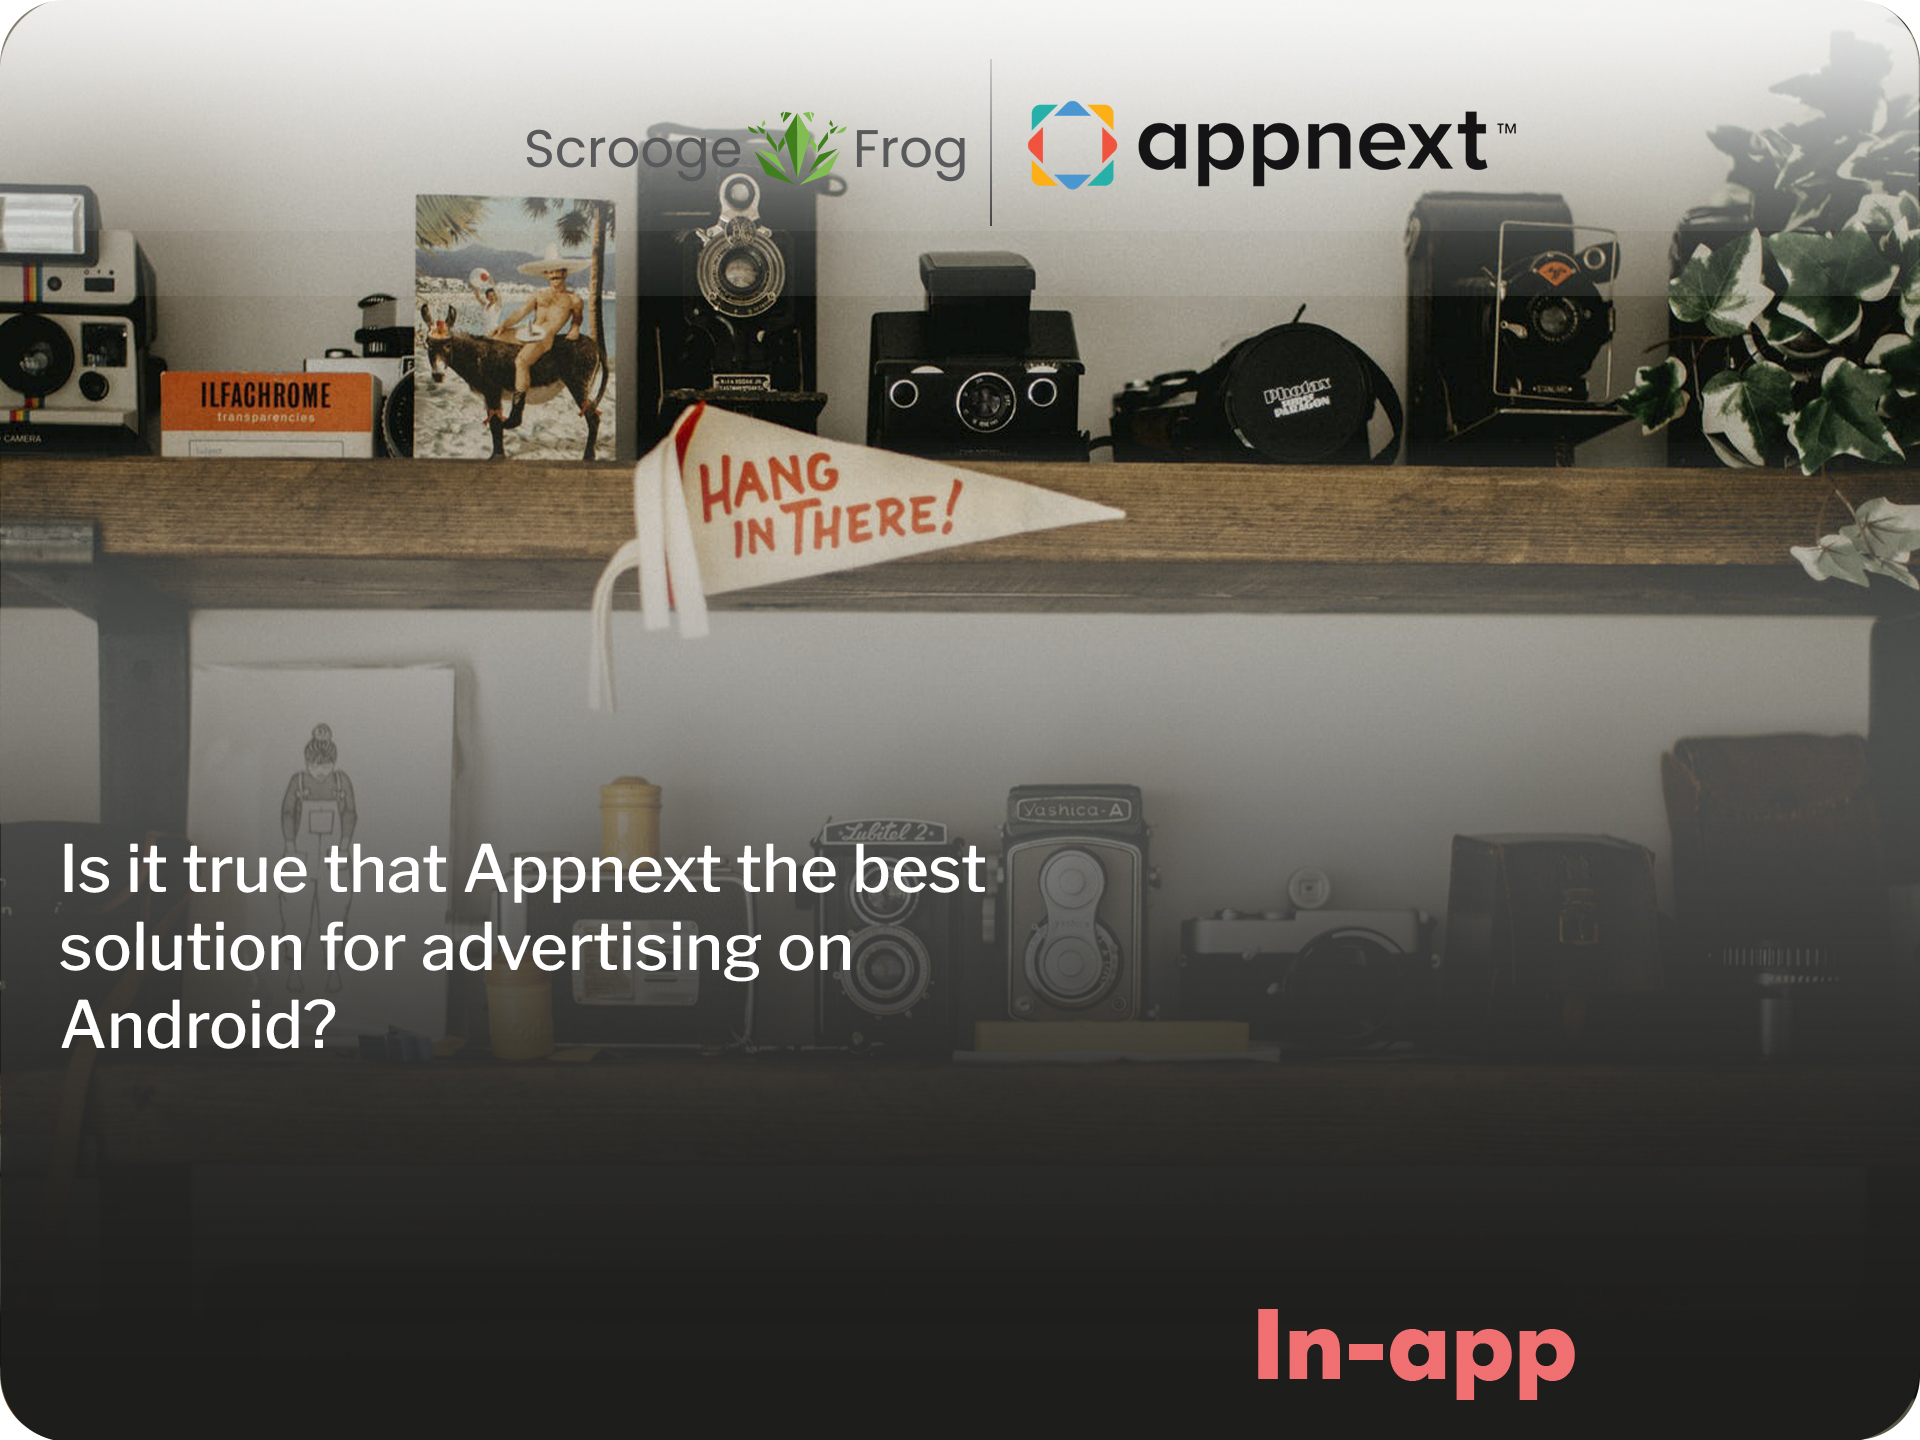 Is it true that Appnext the best solution for advertising on Android?